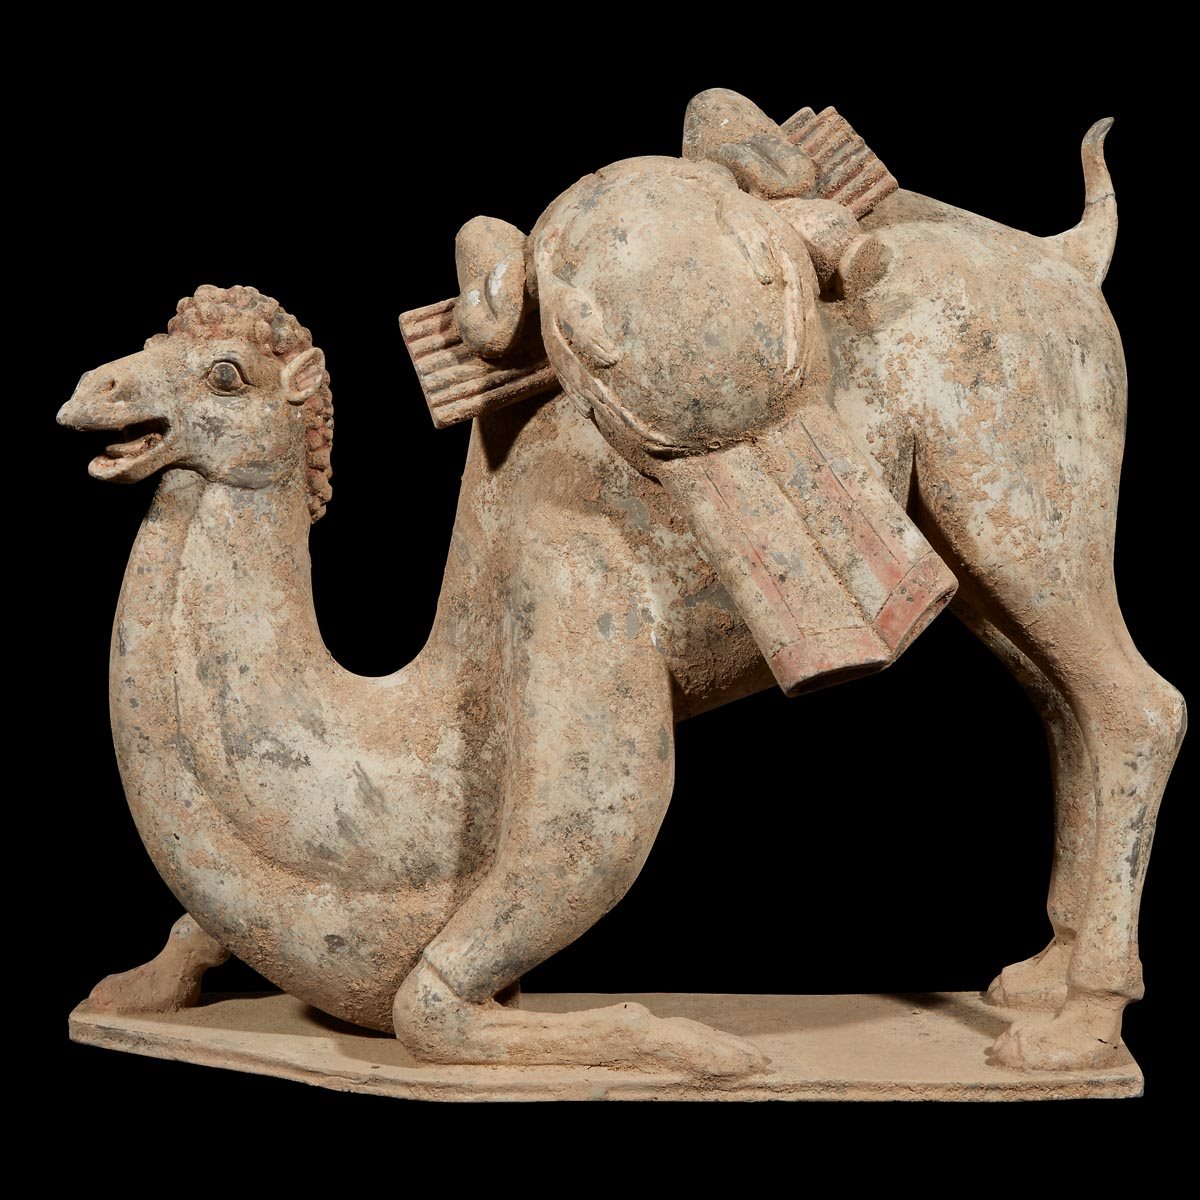 Lot 16: A Chinese grey pottery model of a kneeling Bactrian camel, Northern Qi dynasty, $3,000-5,000, to be offered at Freeman's on March 12, 2019.